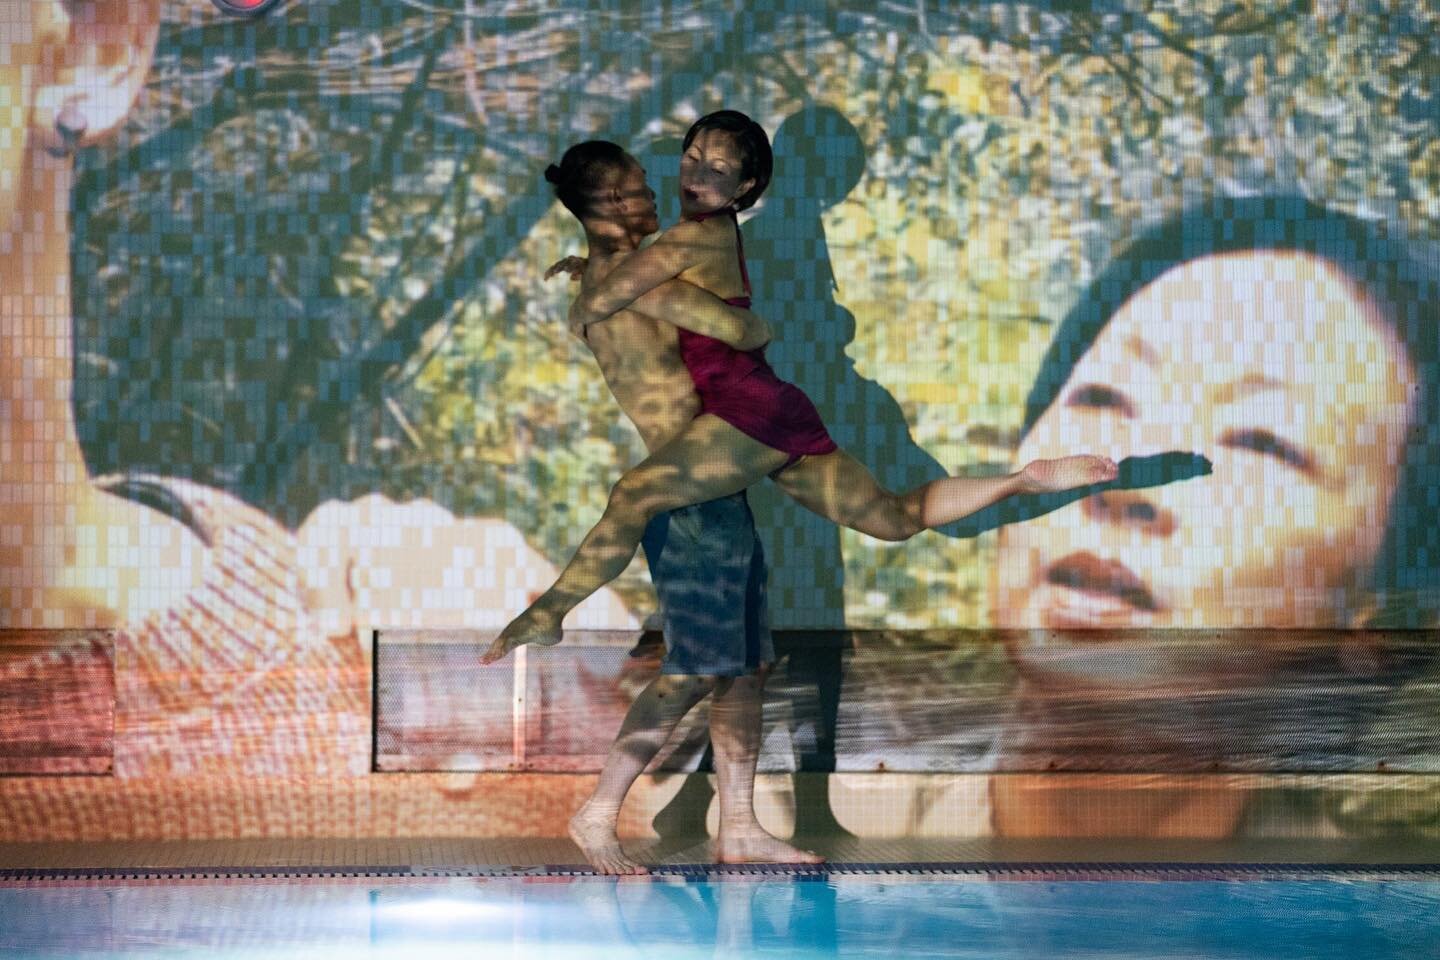 Nominated for Excellence in Visual Design, Olivia Ting and Lenora Lee (media design), Beneath the Surface, choreography by Lenora Lee, in collaboration with the performers, Lenora Lee Dance, YMCA of San Francisco, San Francisco @lenoraleedance